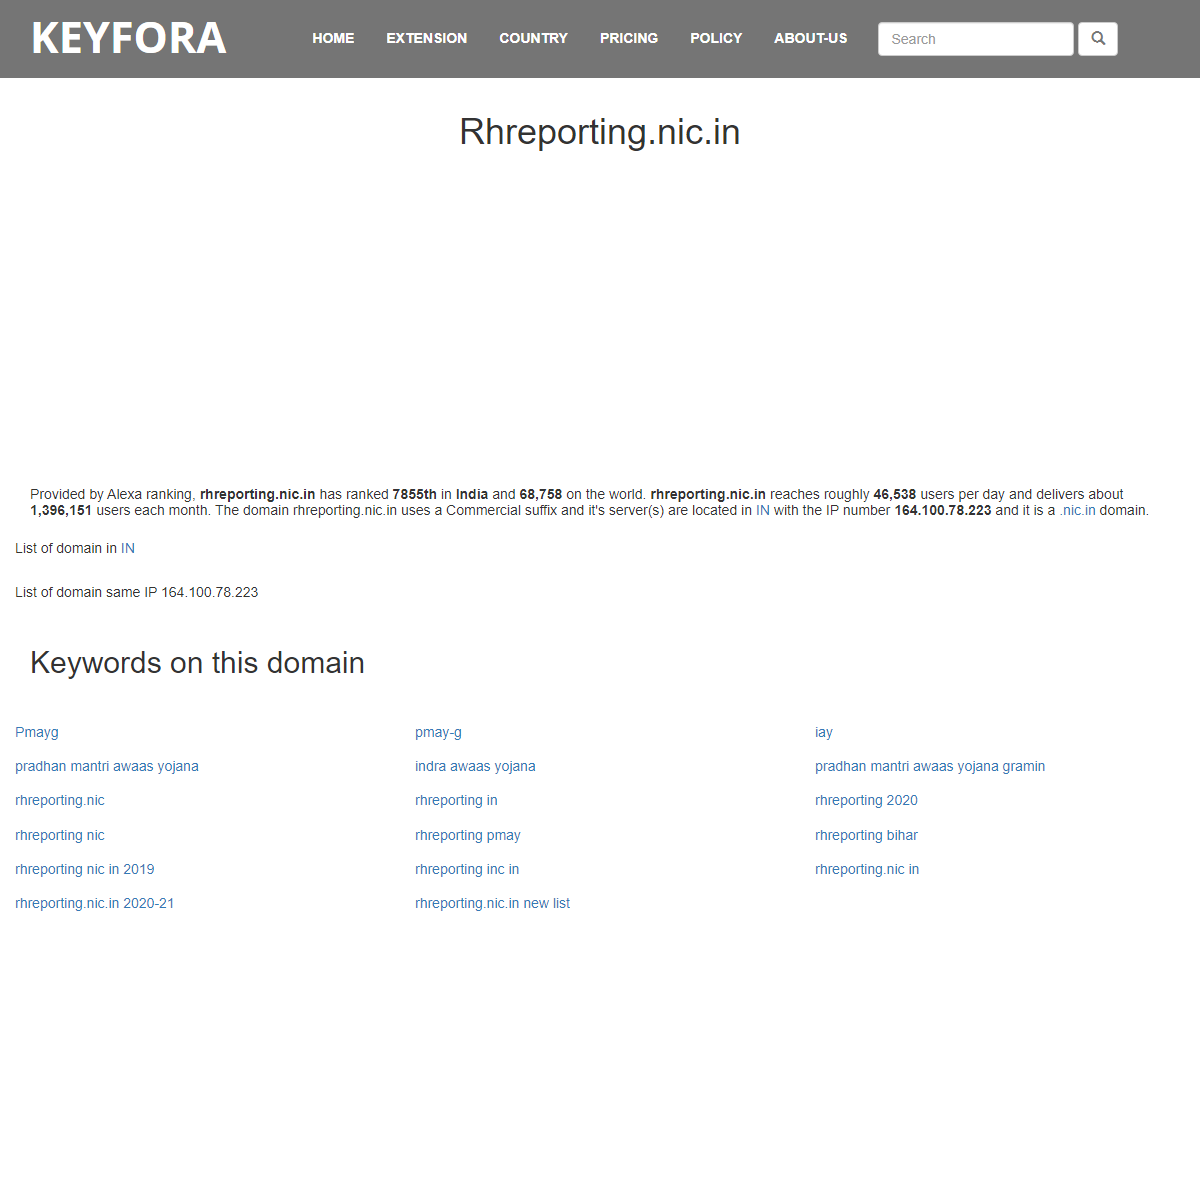 A complete backup of https://www.keyfora.com/site/rhreporting.nic.in